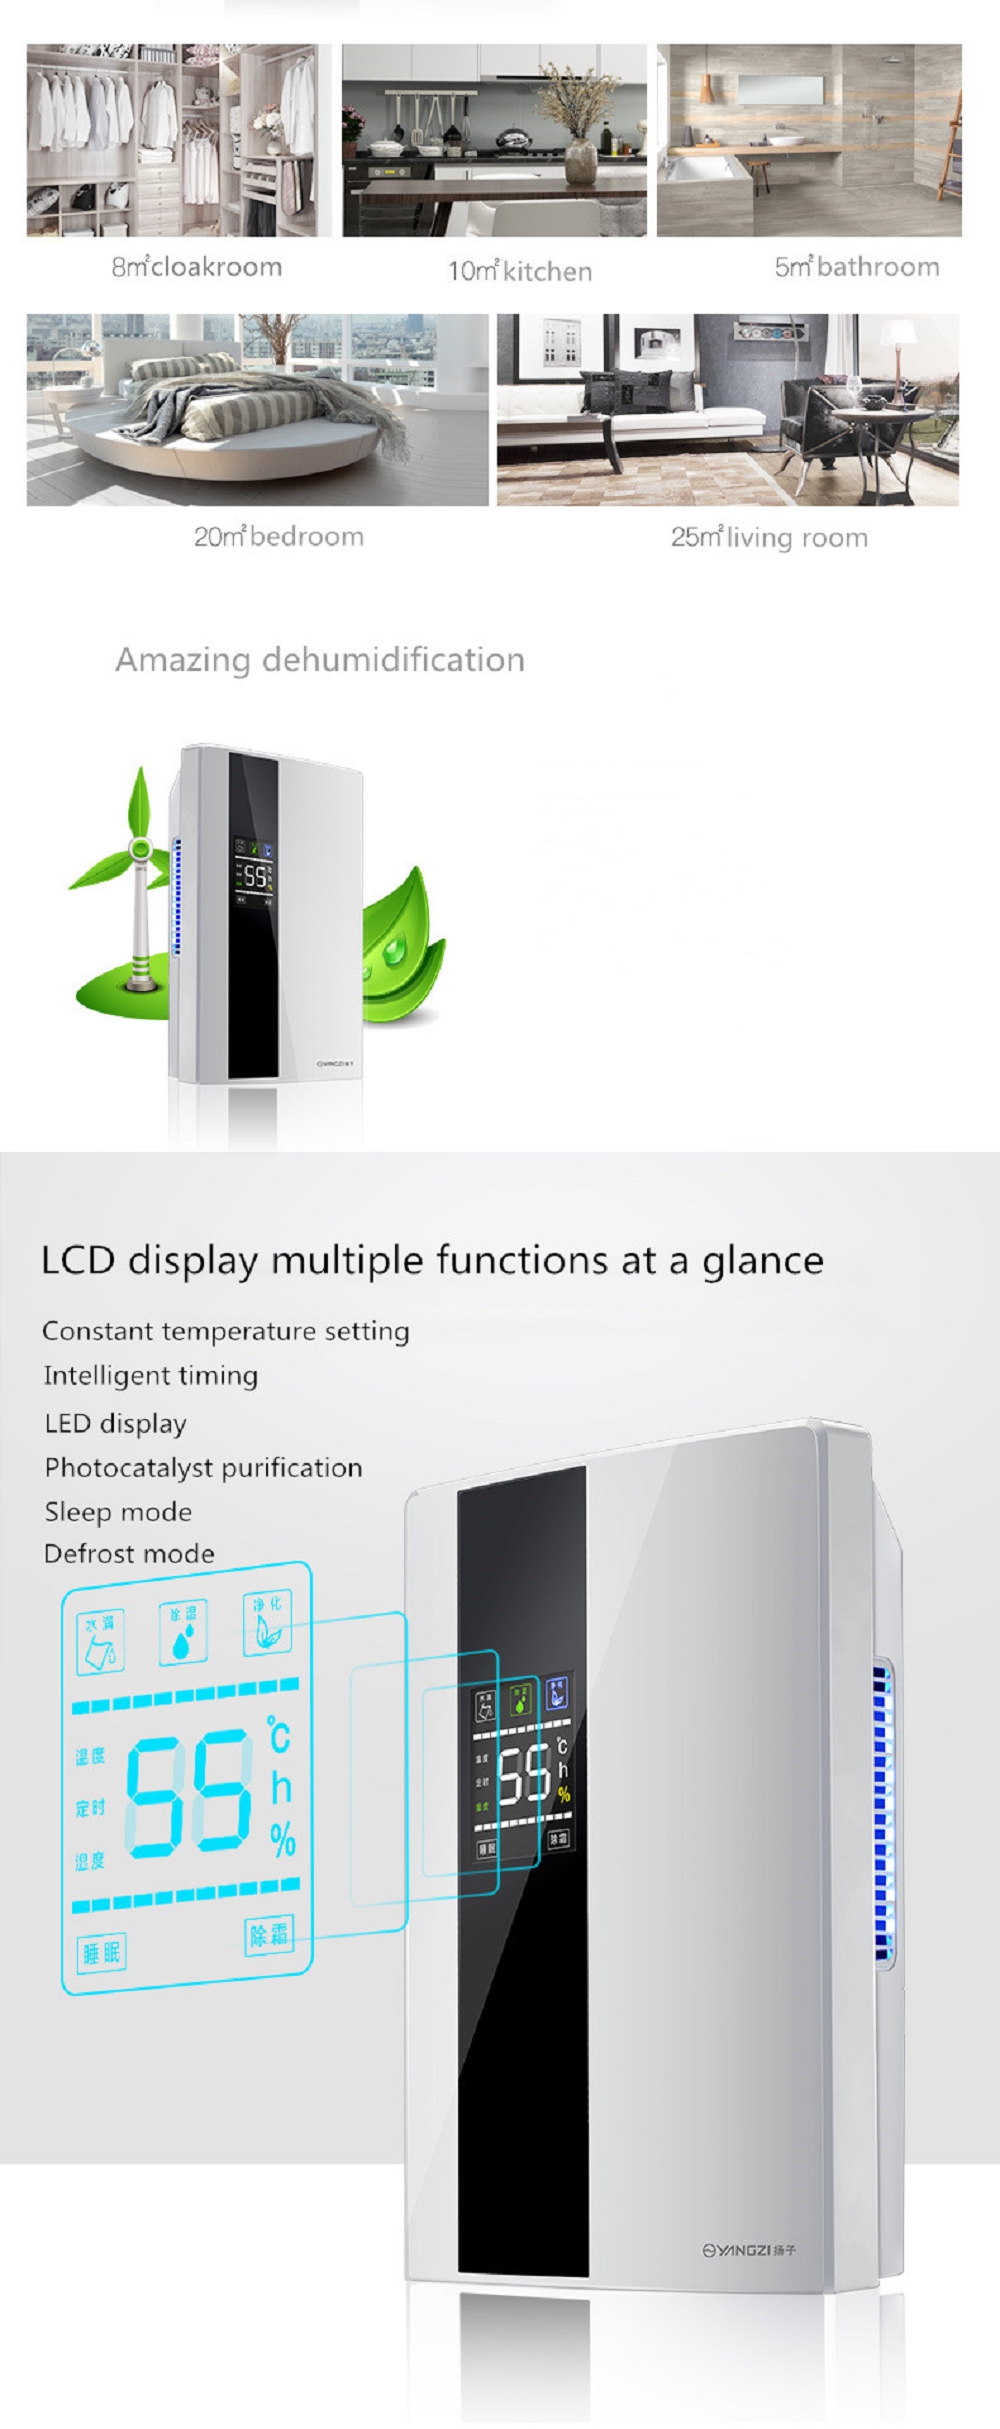 90W-Dehumidifier-Moisture-Absorber-Indoor-Dehumidifier-LCD-Display-Low-Noise-Remote-Control-Timing-E-1702908-4